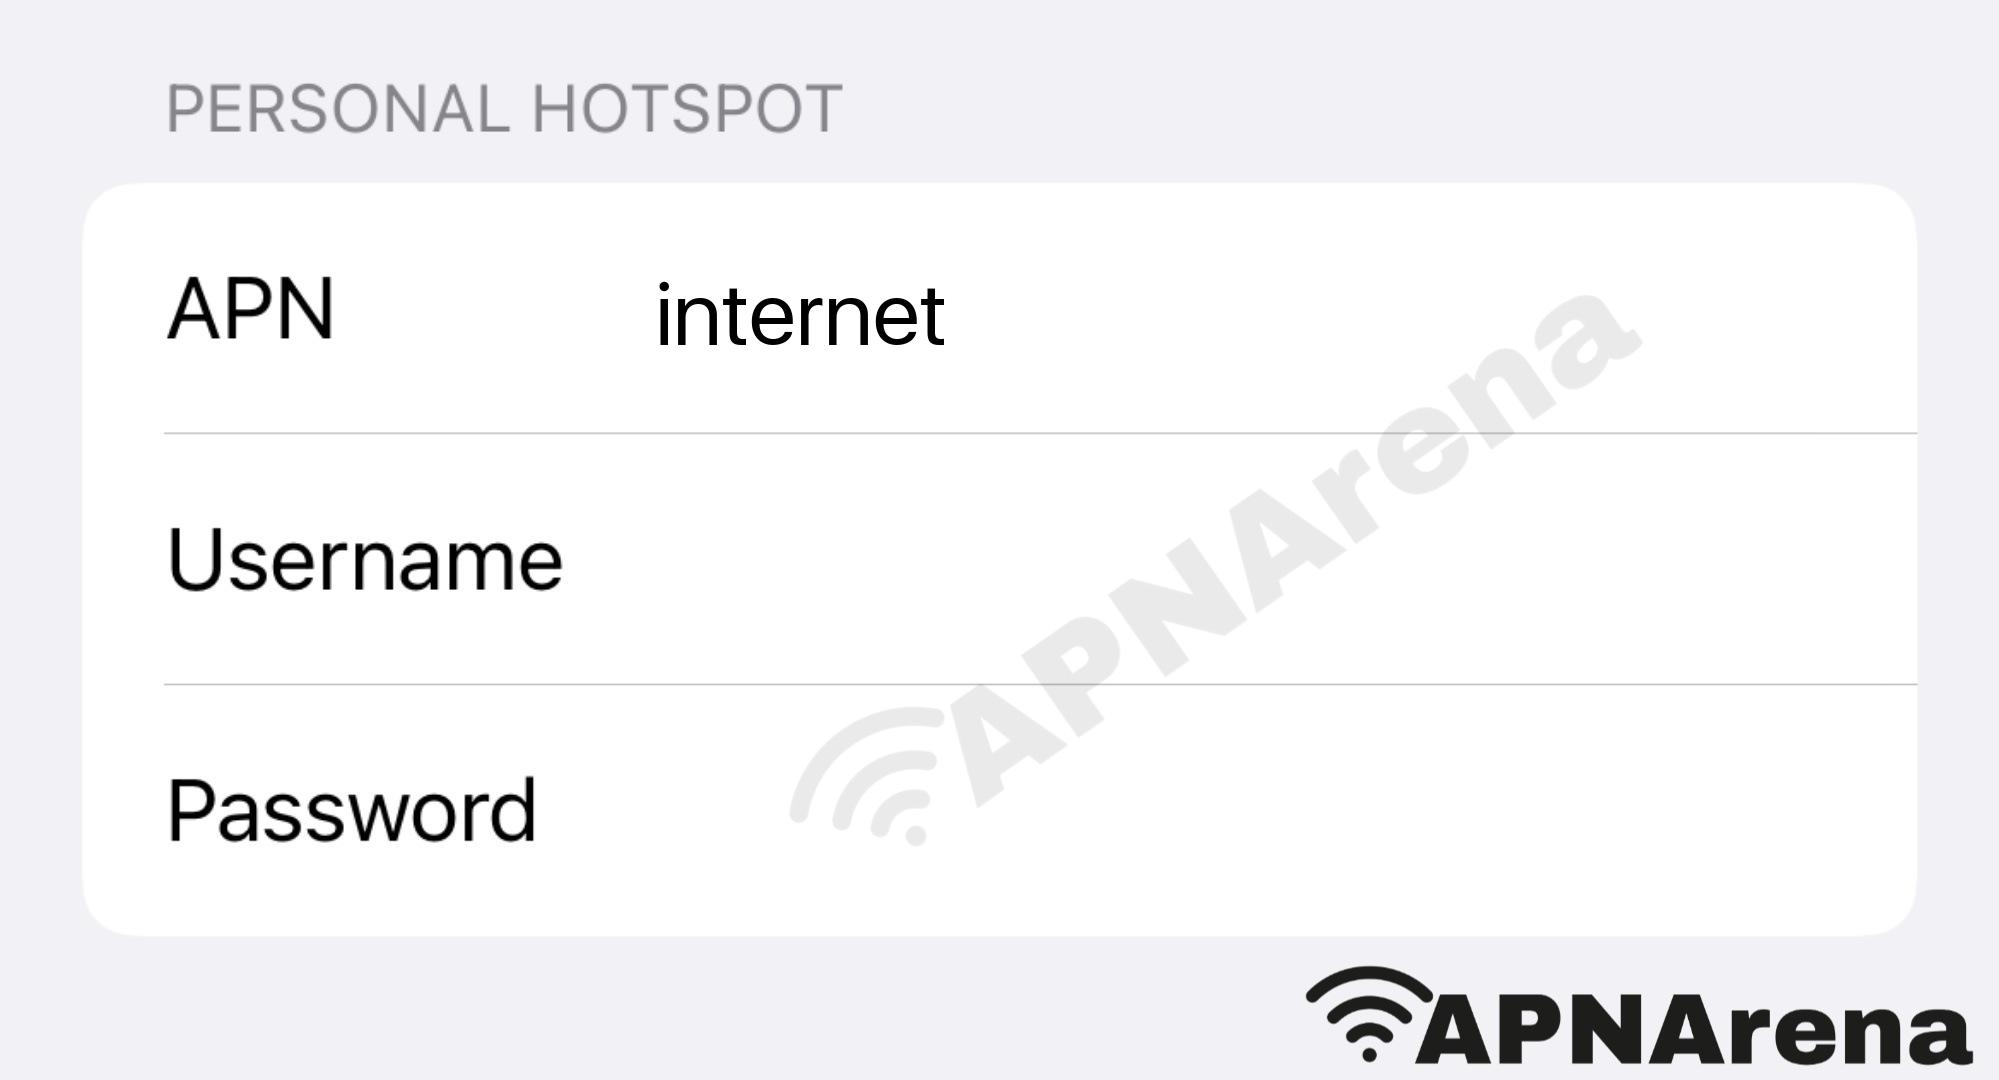 C Spire Personal Hotspot Settings for iPhone